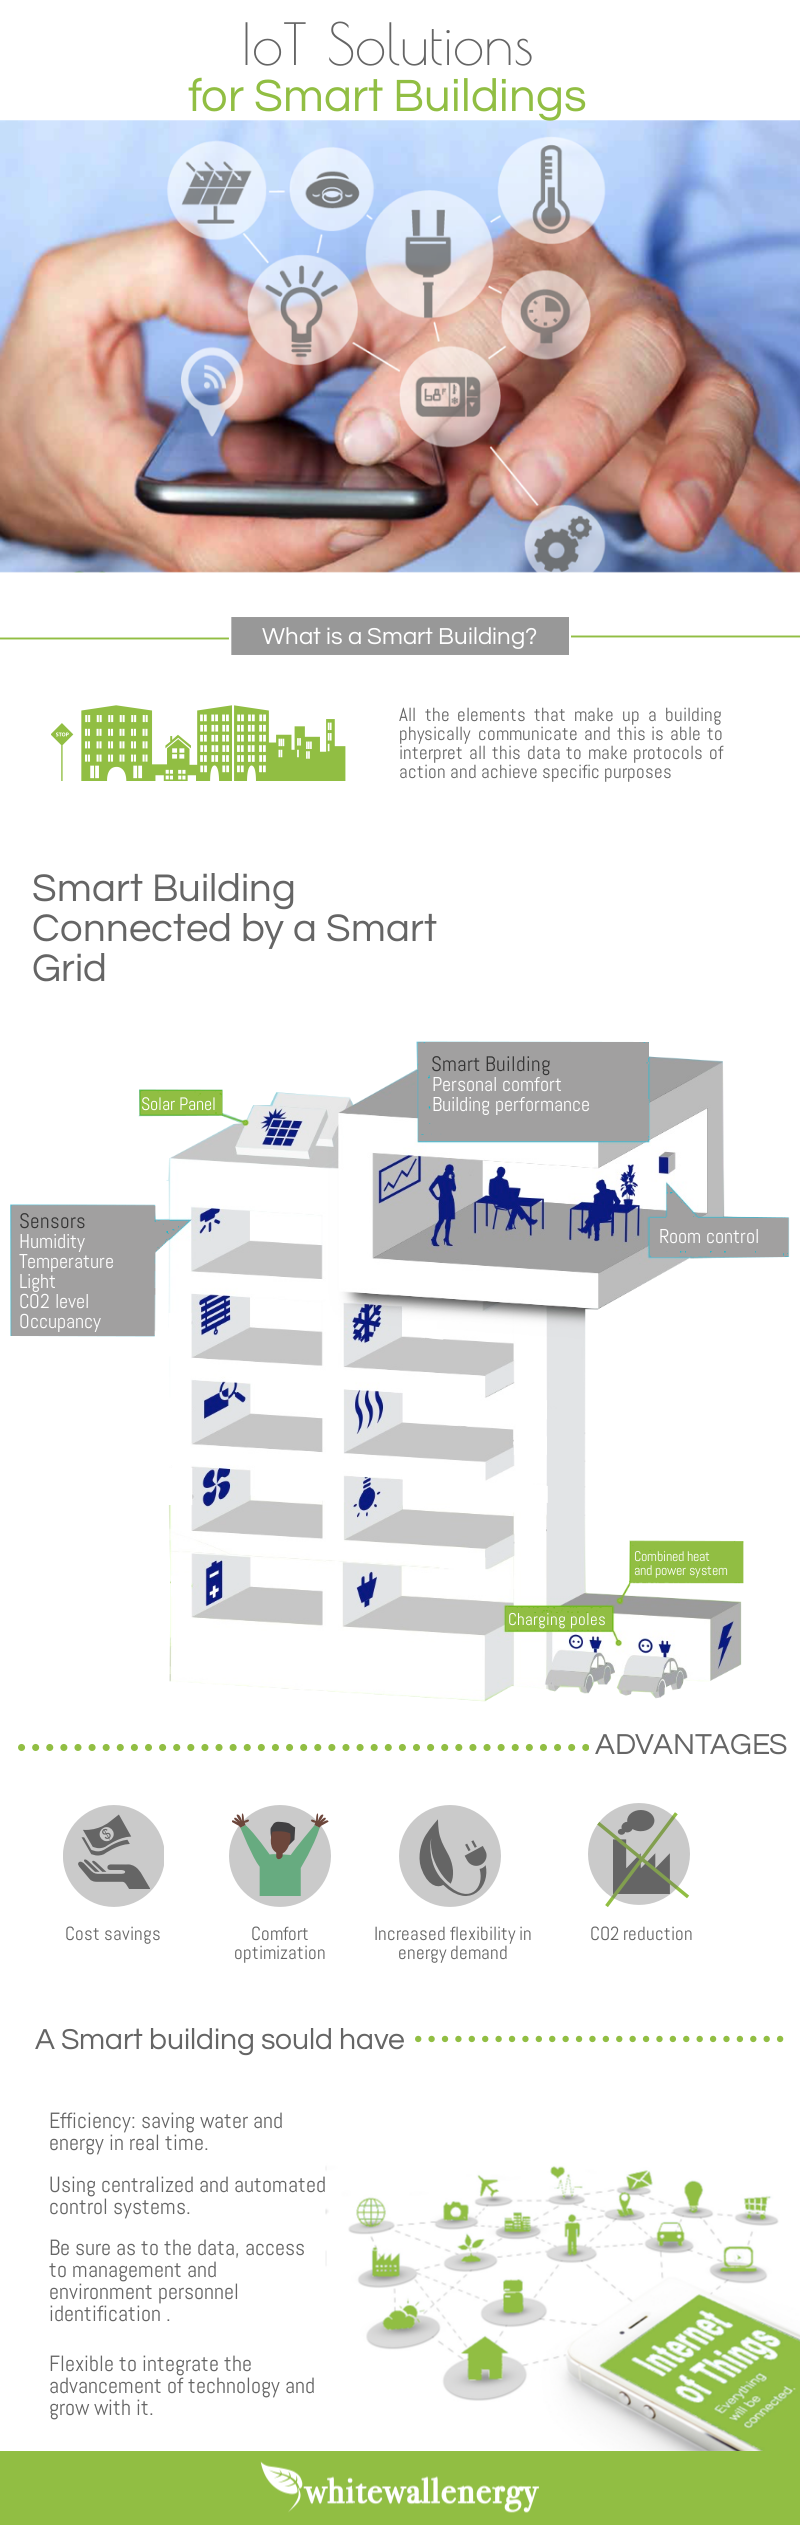  [Infographic] IoT solutions for Smart Buildings